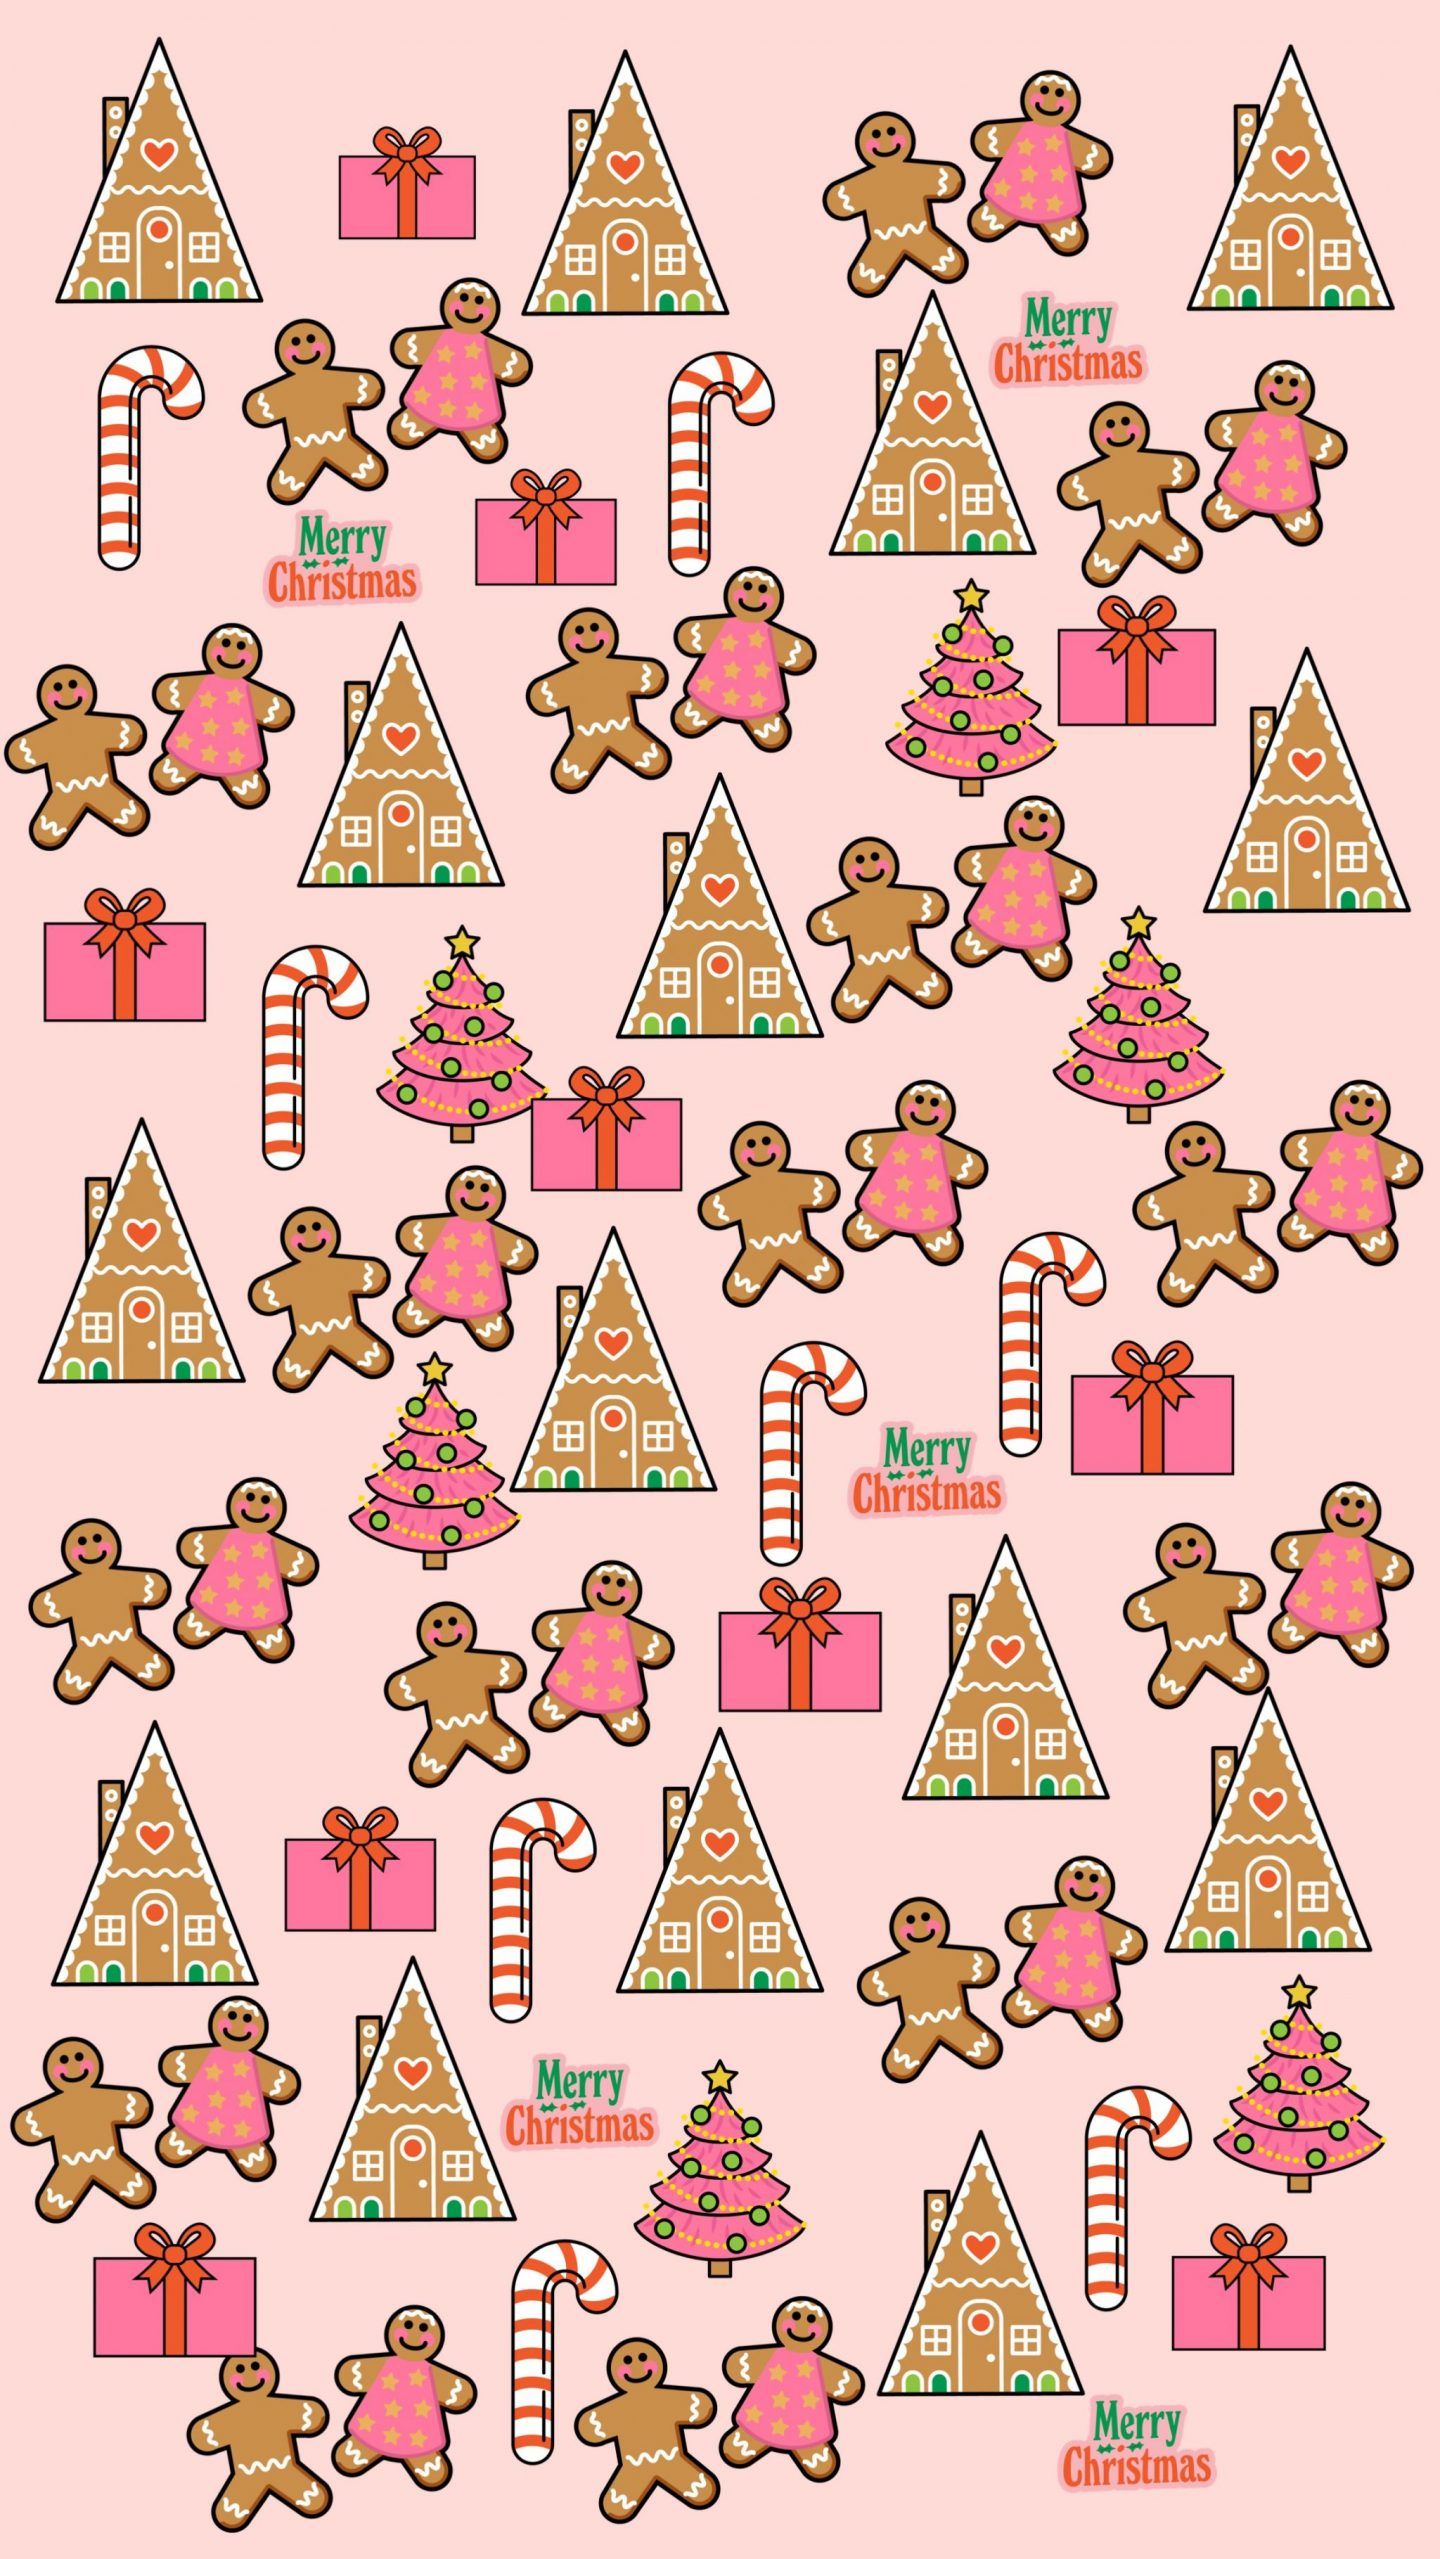 Cute Aesthetic Christmas Wallpapers - Photos